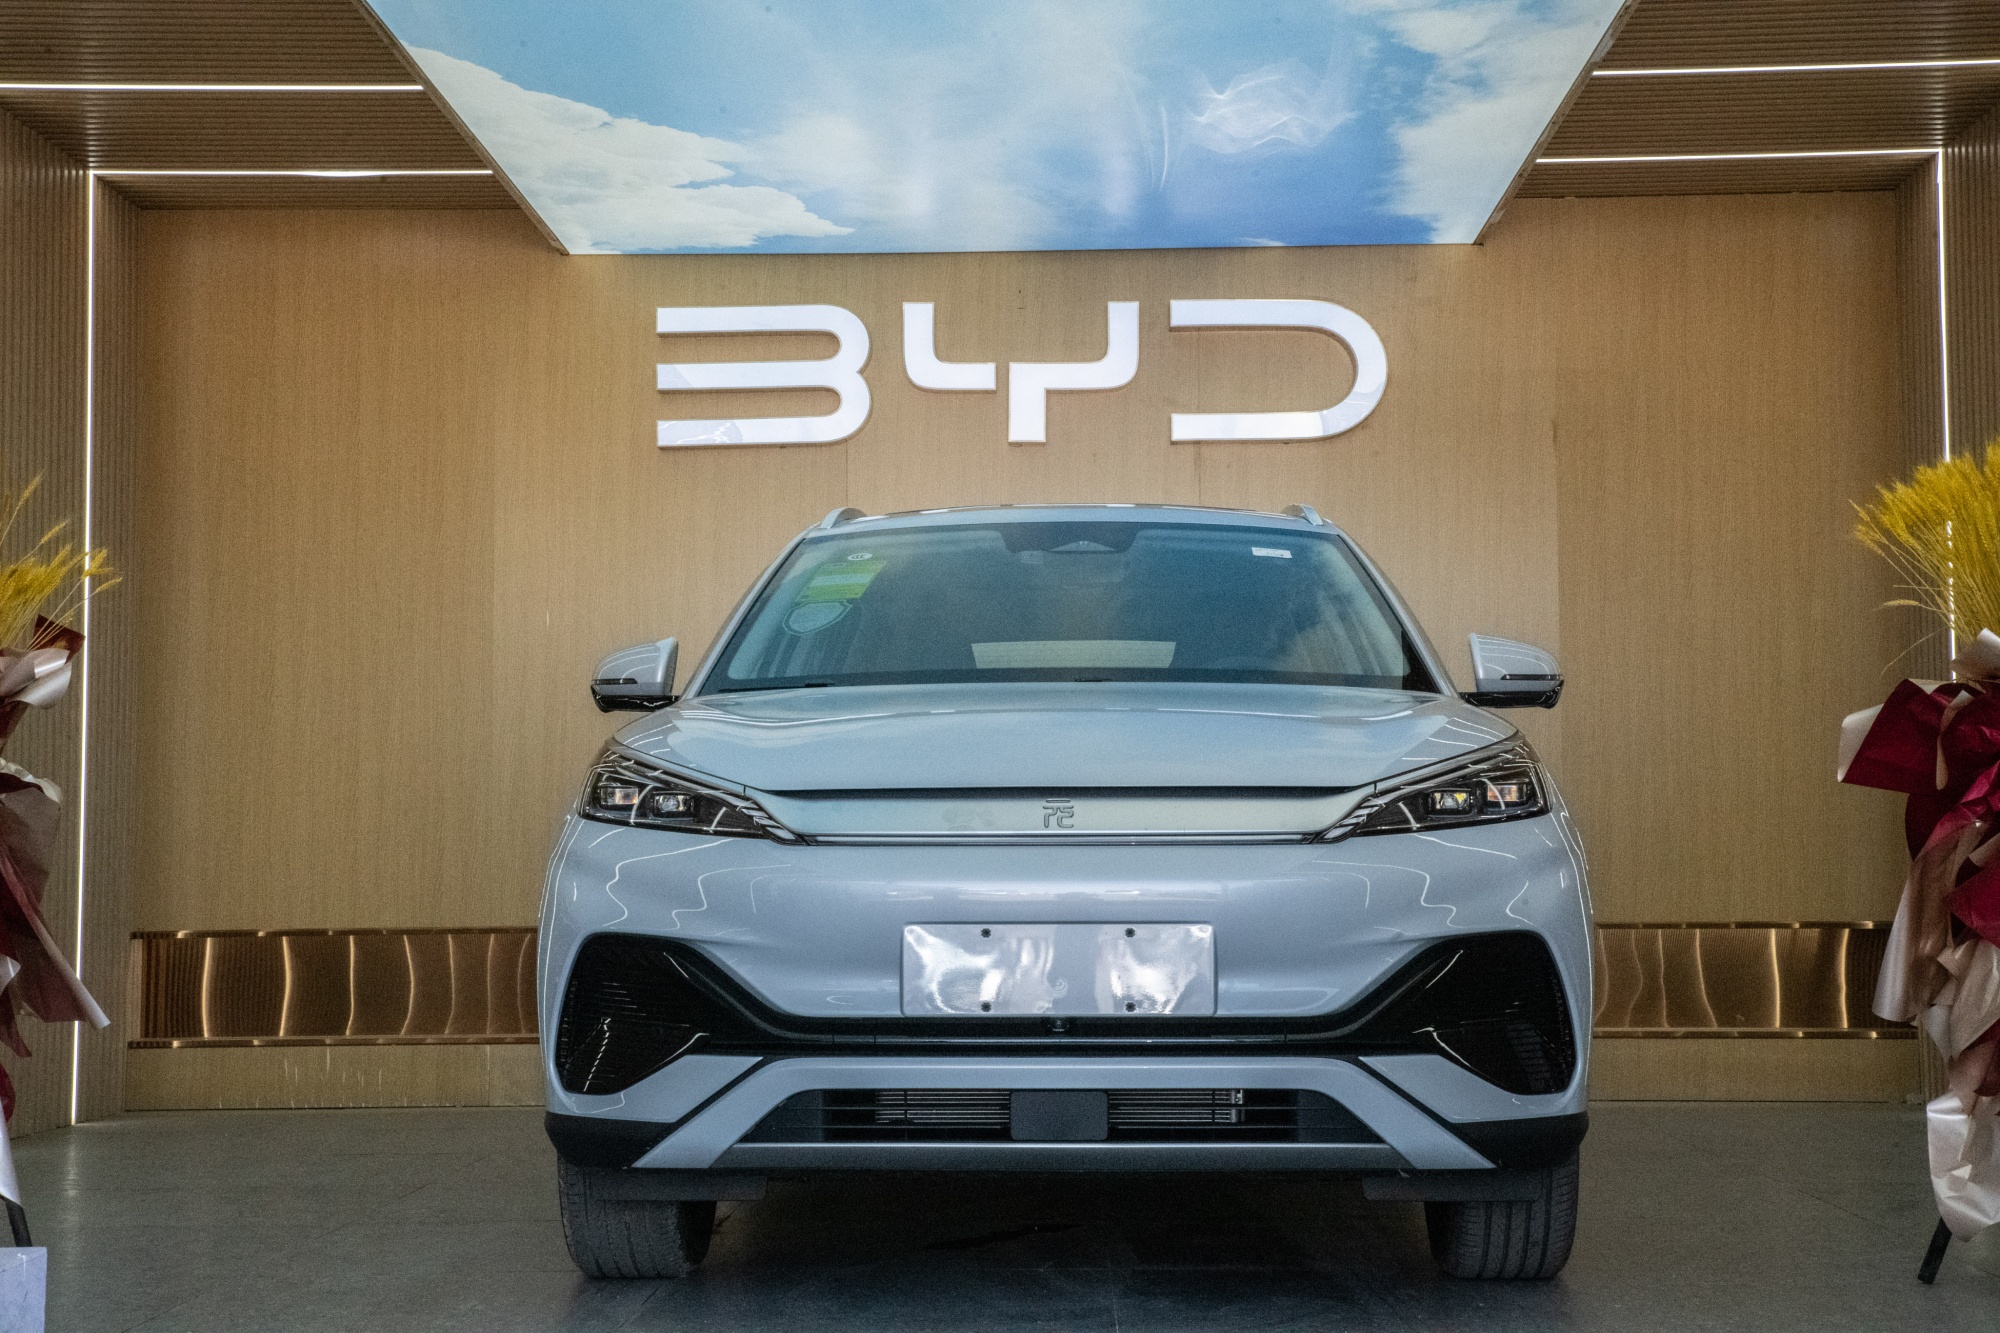 BYD Confident of Hitting 3 Million Sales Despite China Weakness - Bloomberg